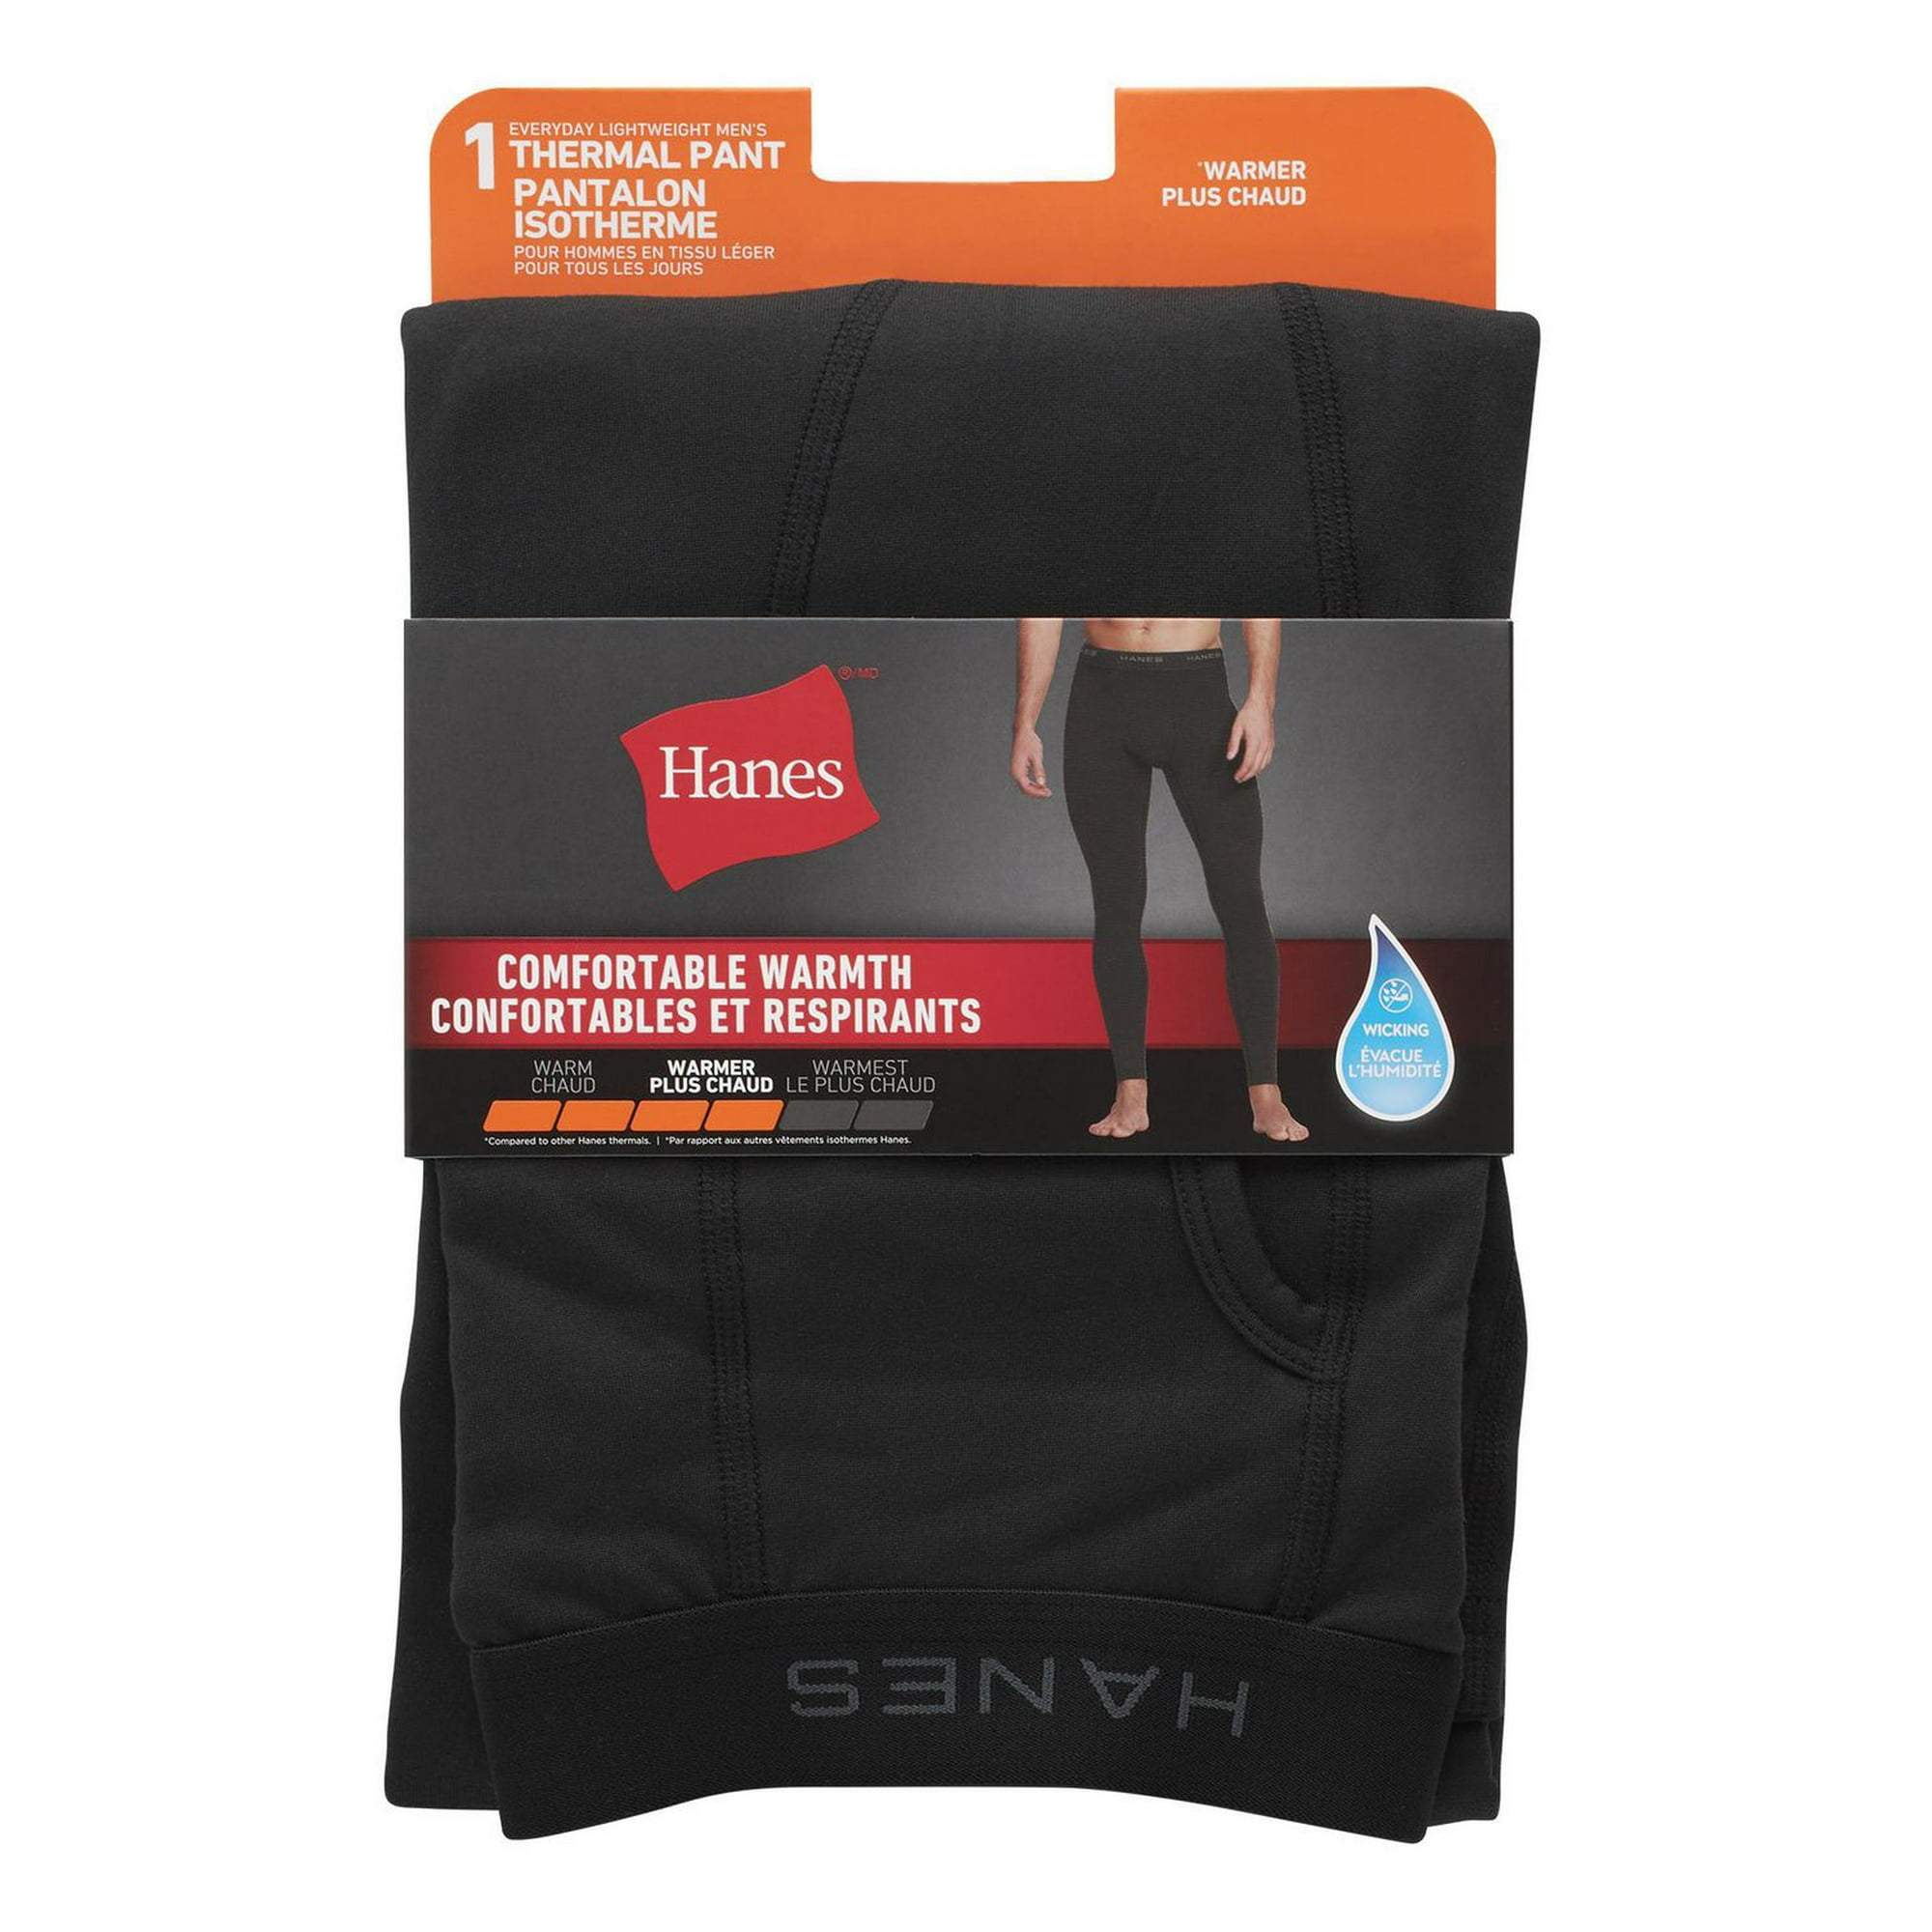 Hanes Yoga Pant - Get Best Price from Manufacturers & Suppliers in India